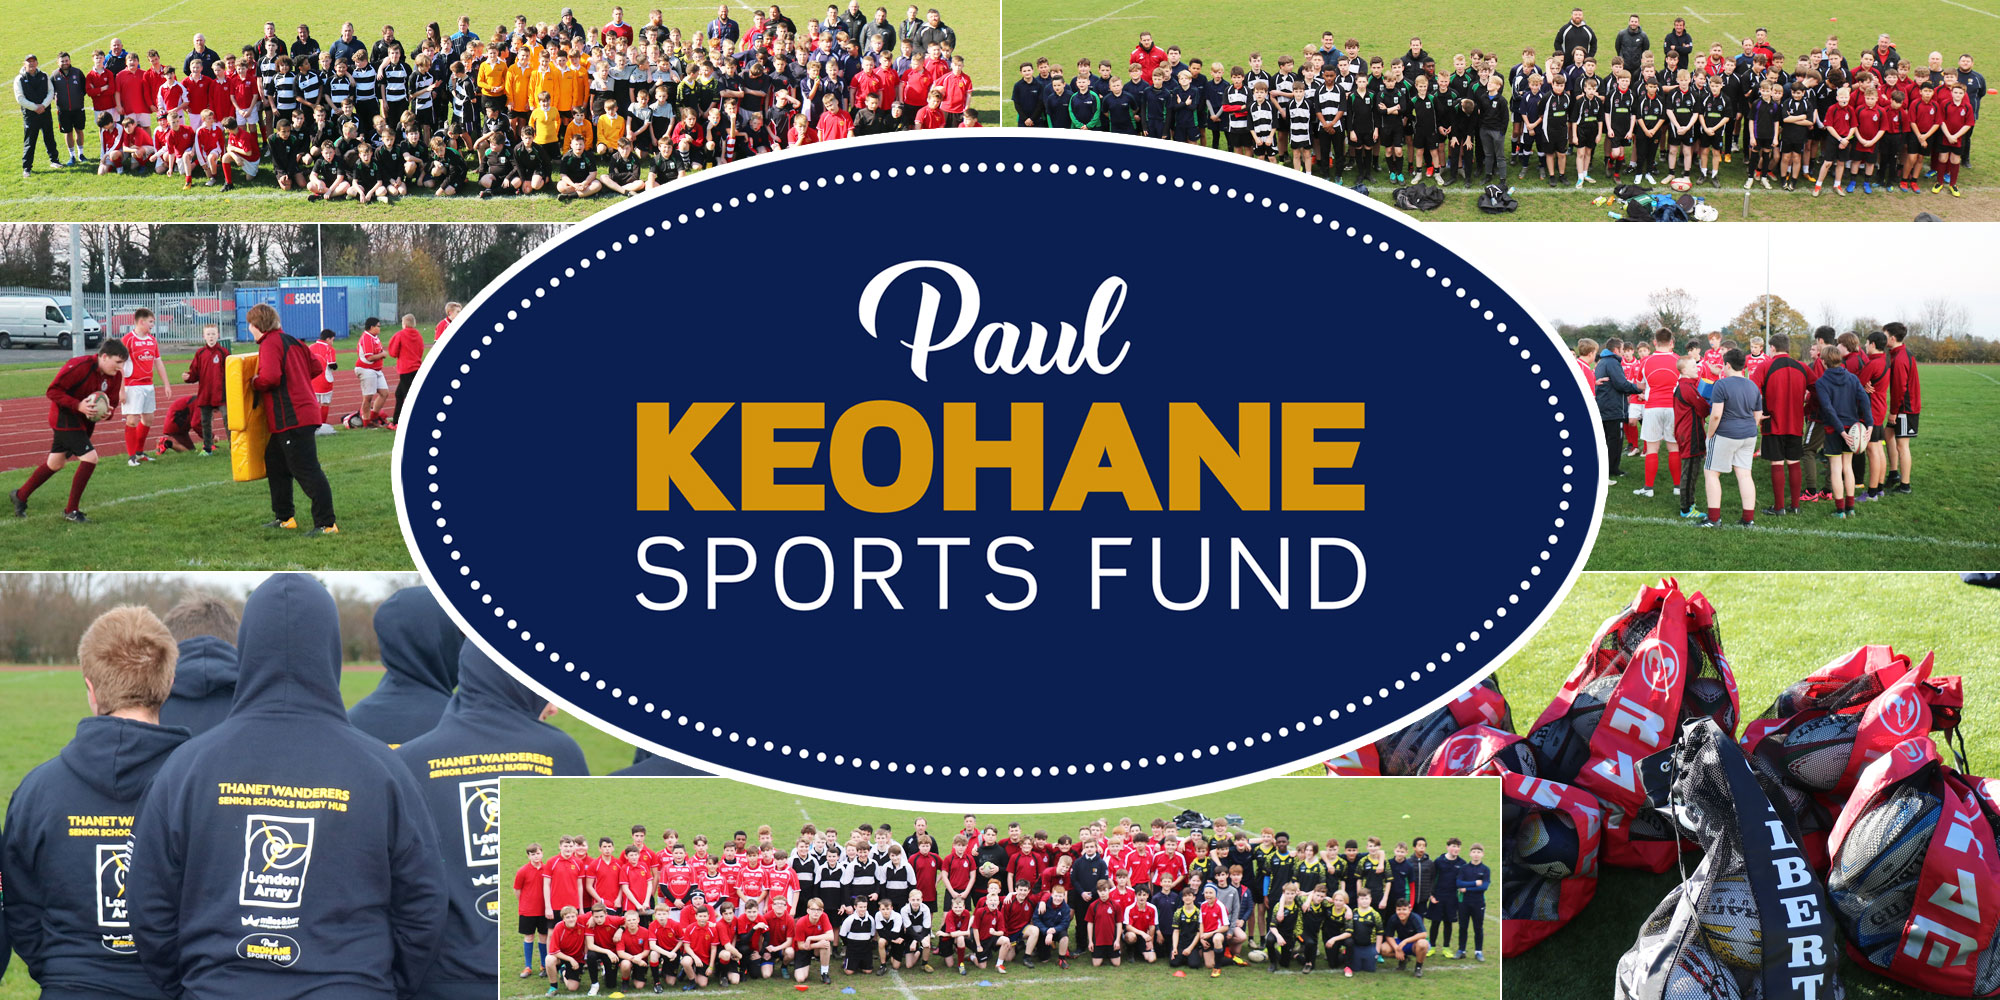 Logo and images - Paul Keohane Sports Fund